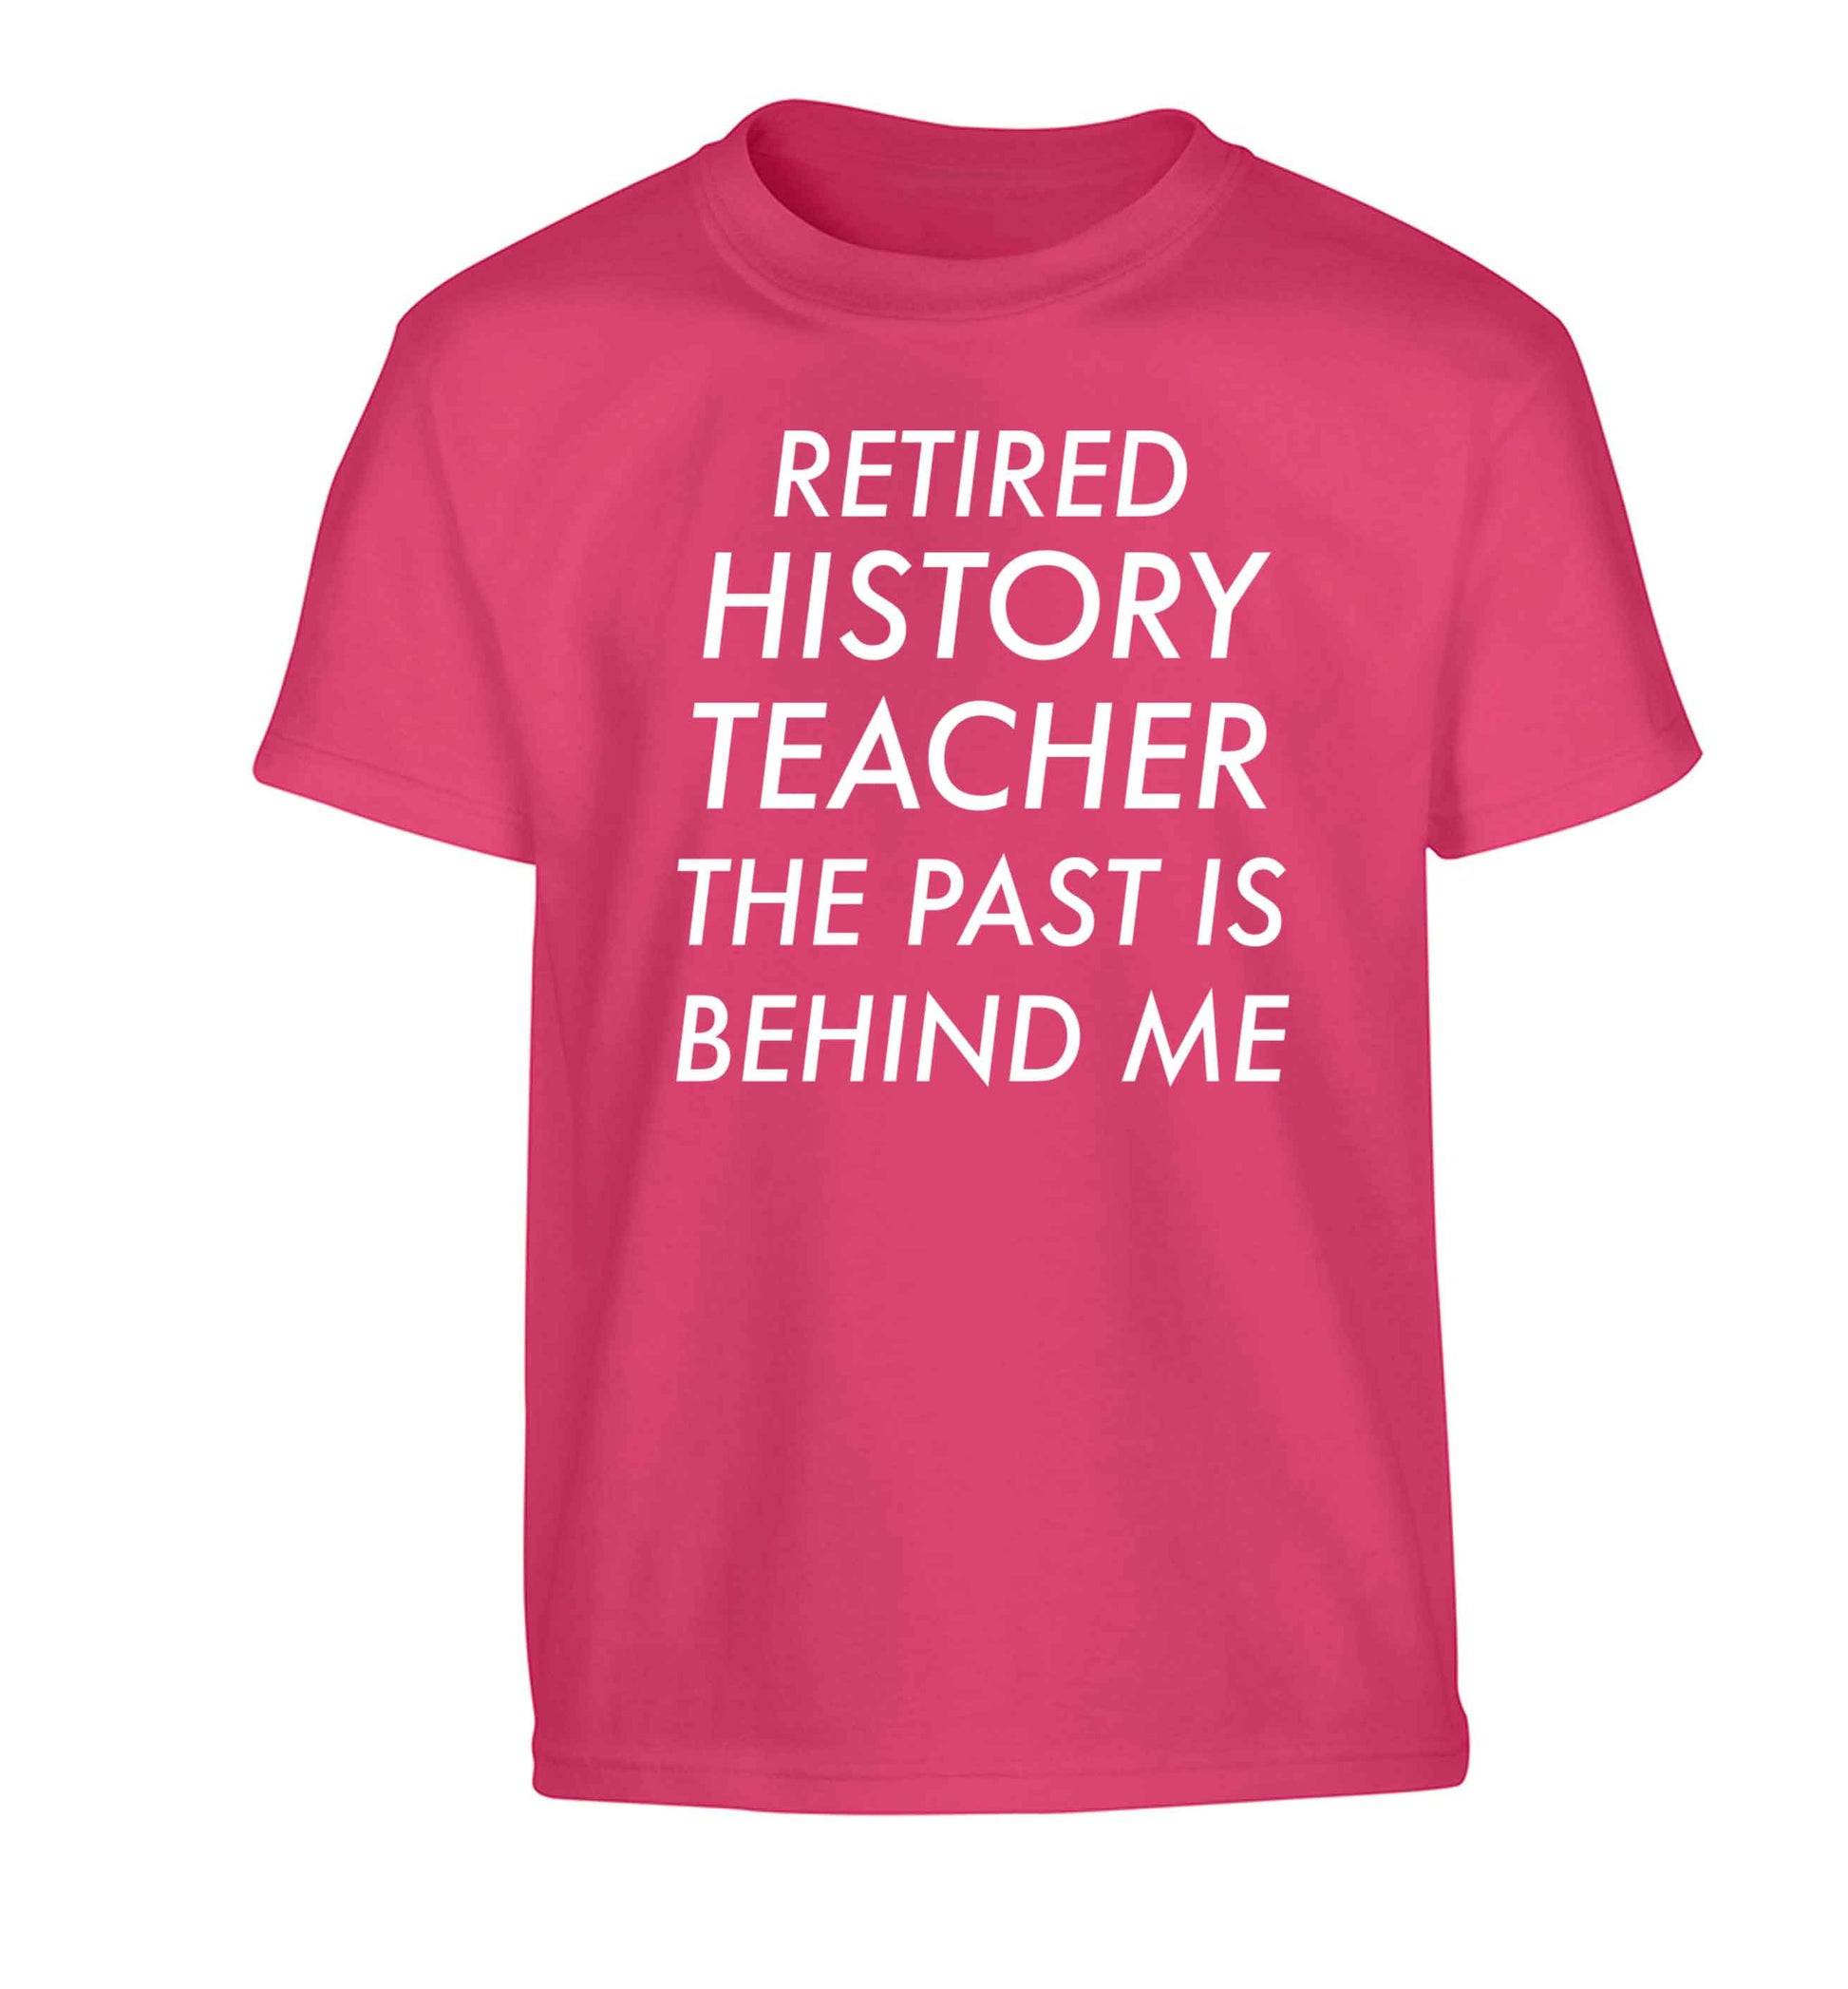 Retired history teacher the past is behind me Children's pink Tshirt 12-13 Years